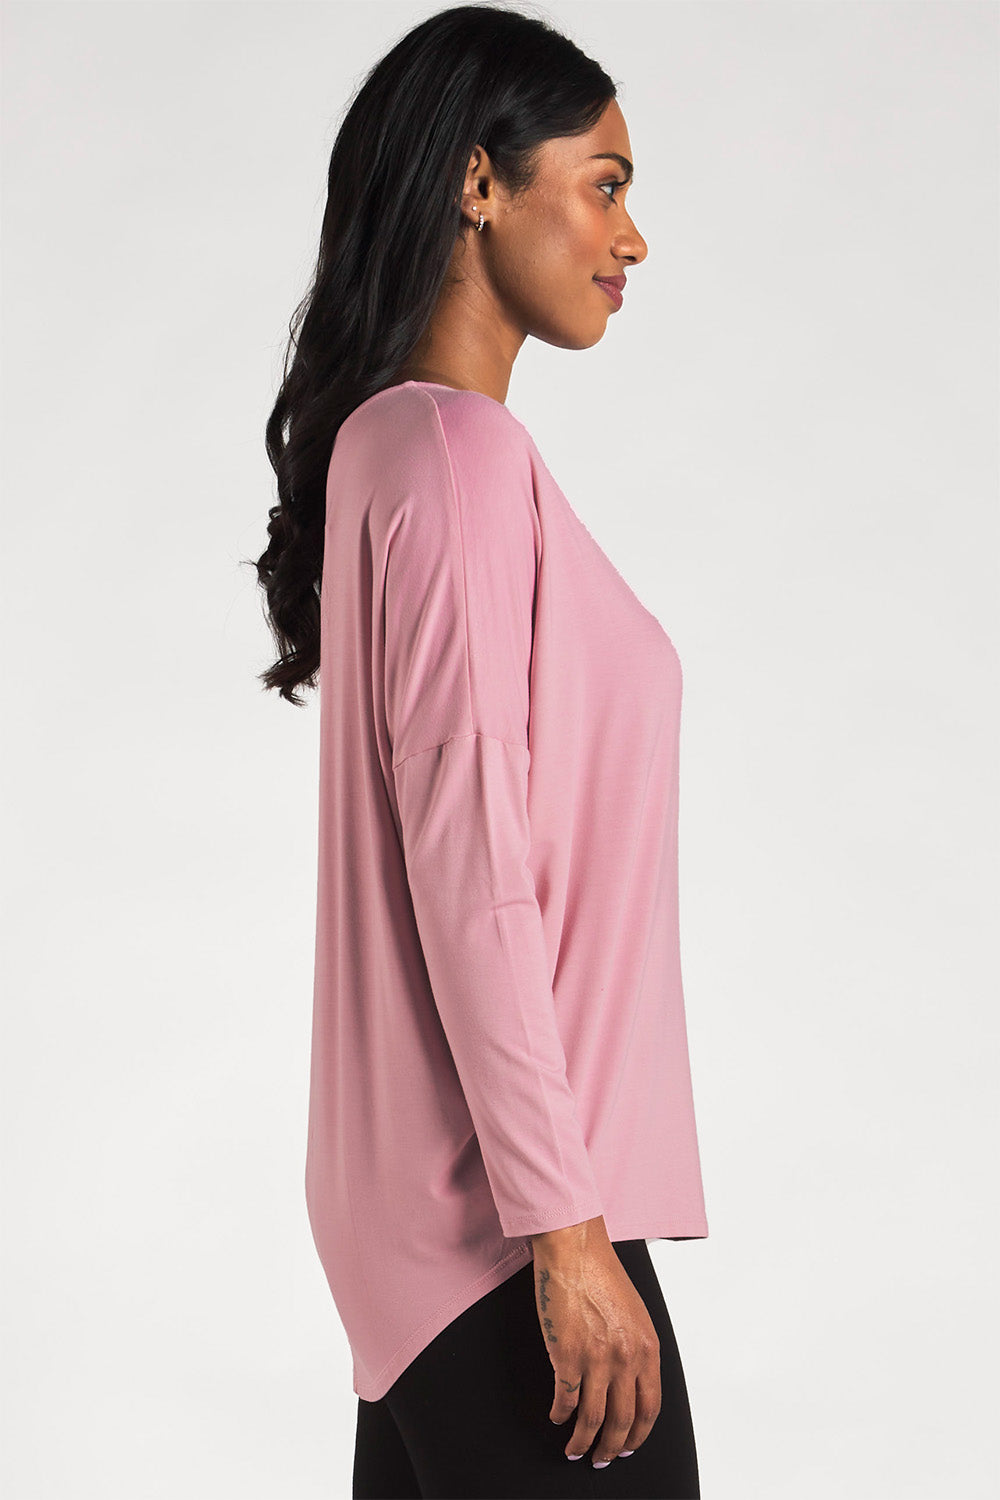 Side view of a woman styling a Pink long sleeve top by Terrera.